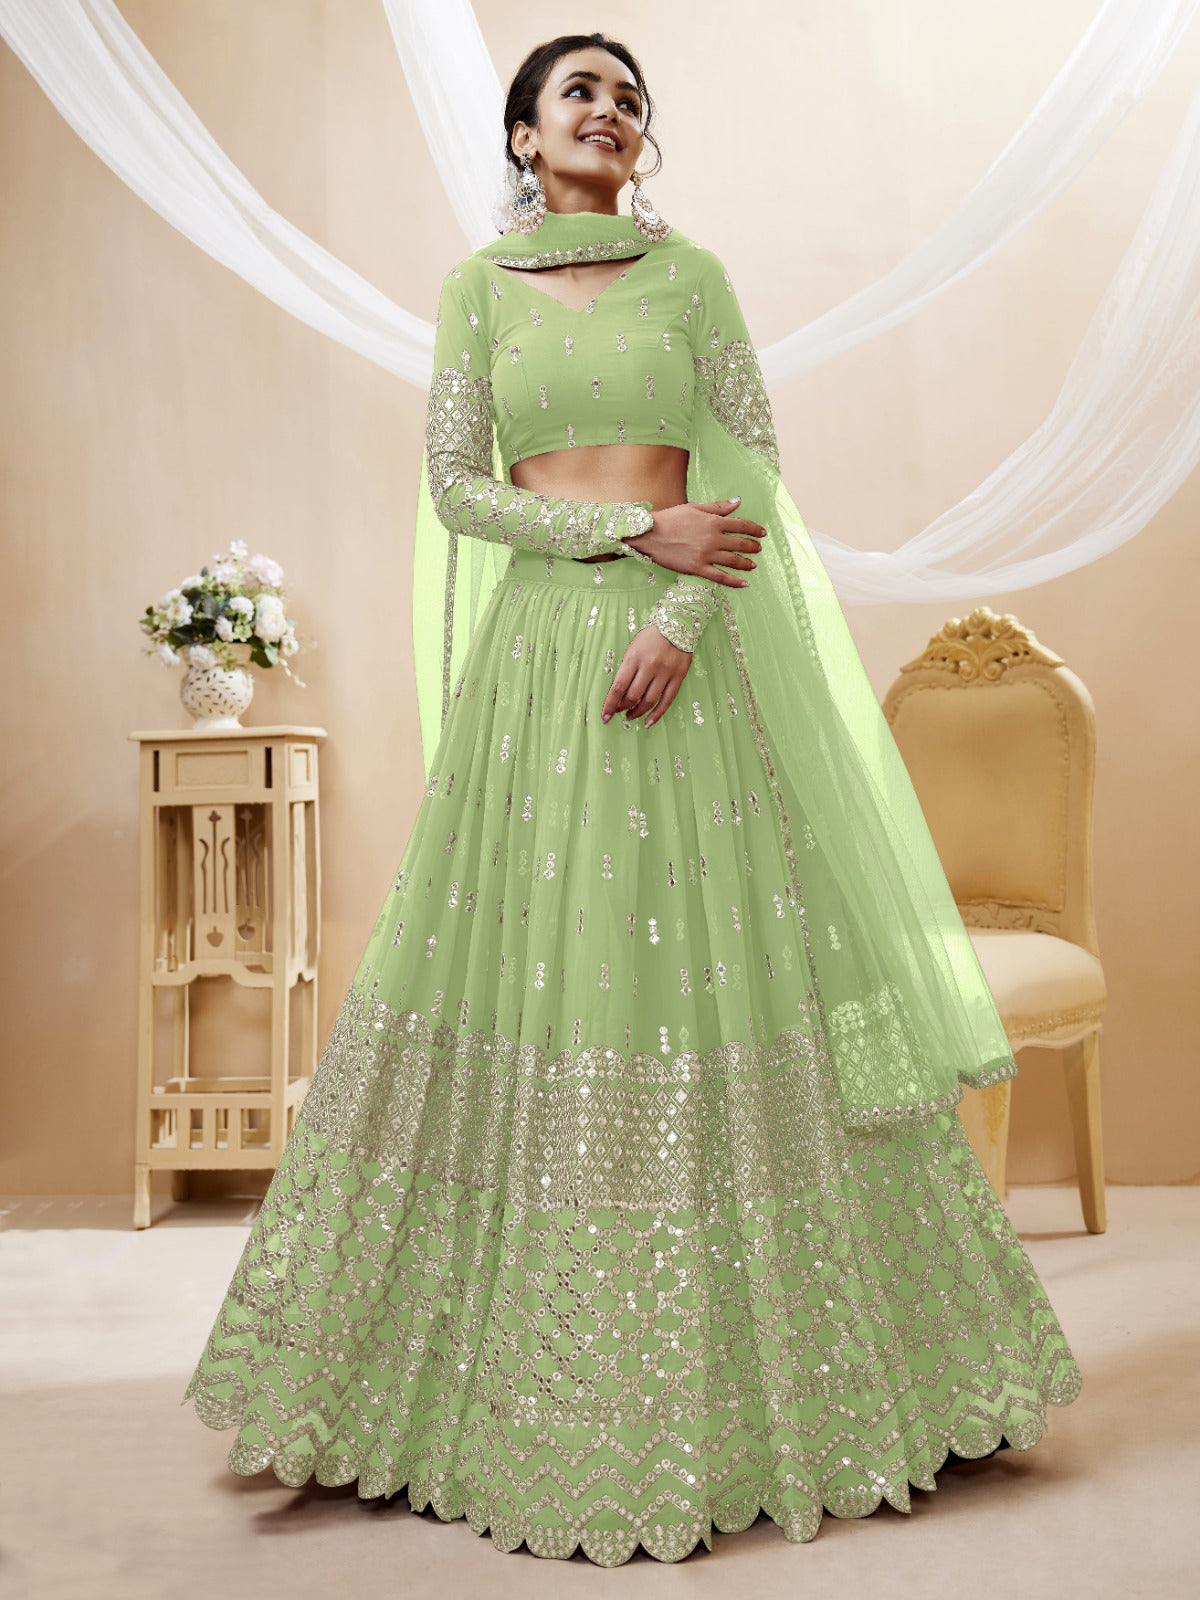 ANARKALI GOWN | Bridesmaid outfit, Indian outfits lehenga, Indian bridesmaid  dresses